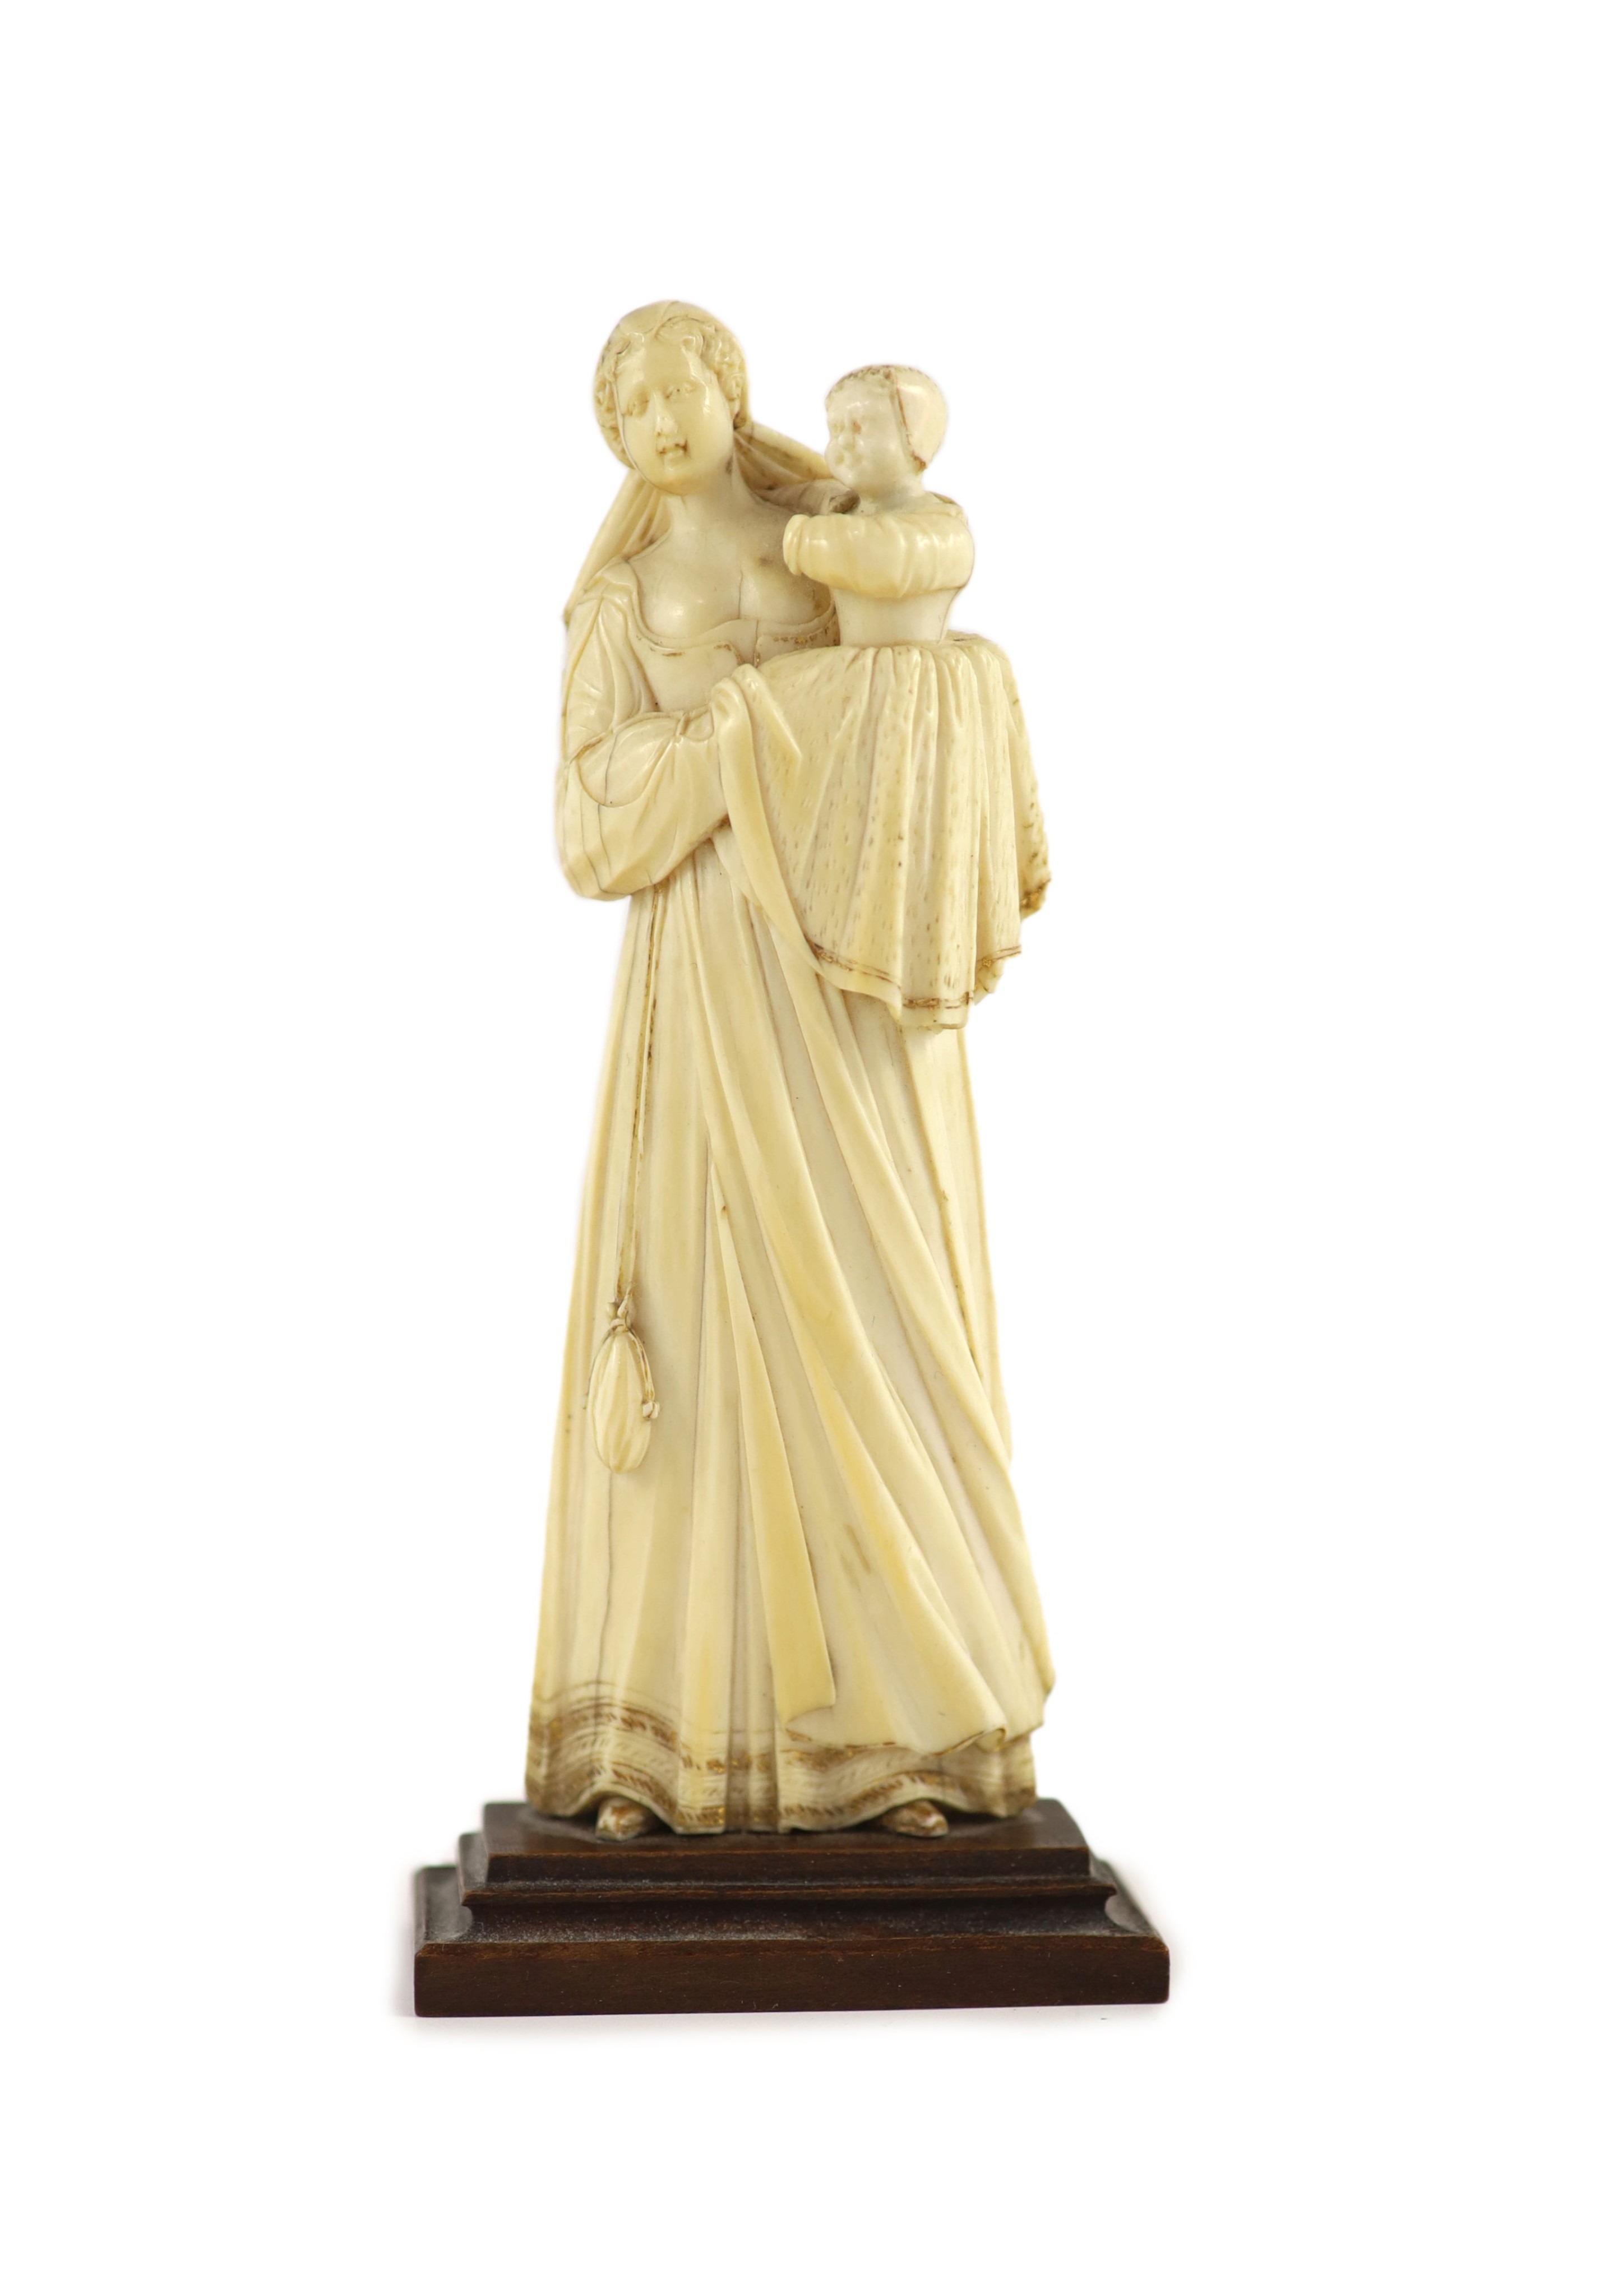 A 17th century French ivory group of a mother and child, ex Hever Castle collection,ex Hever